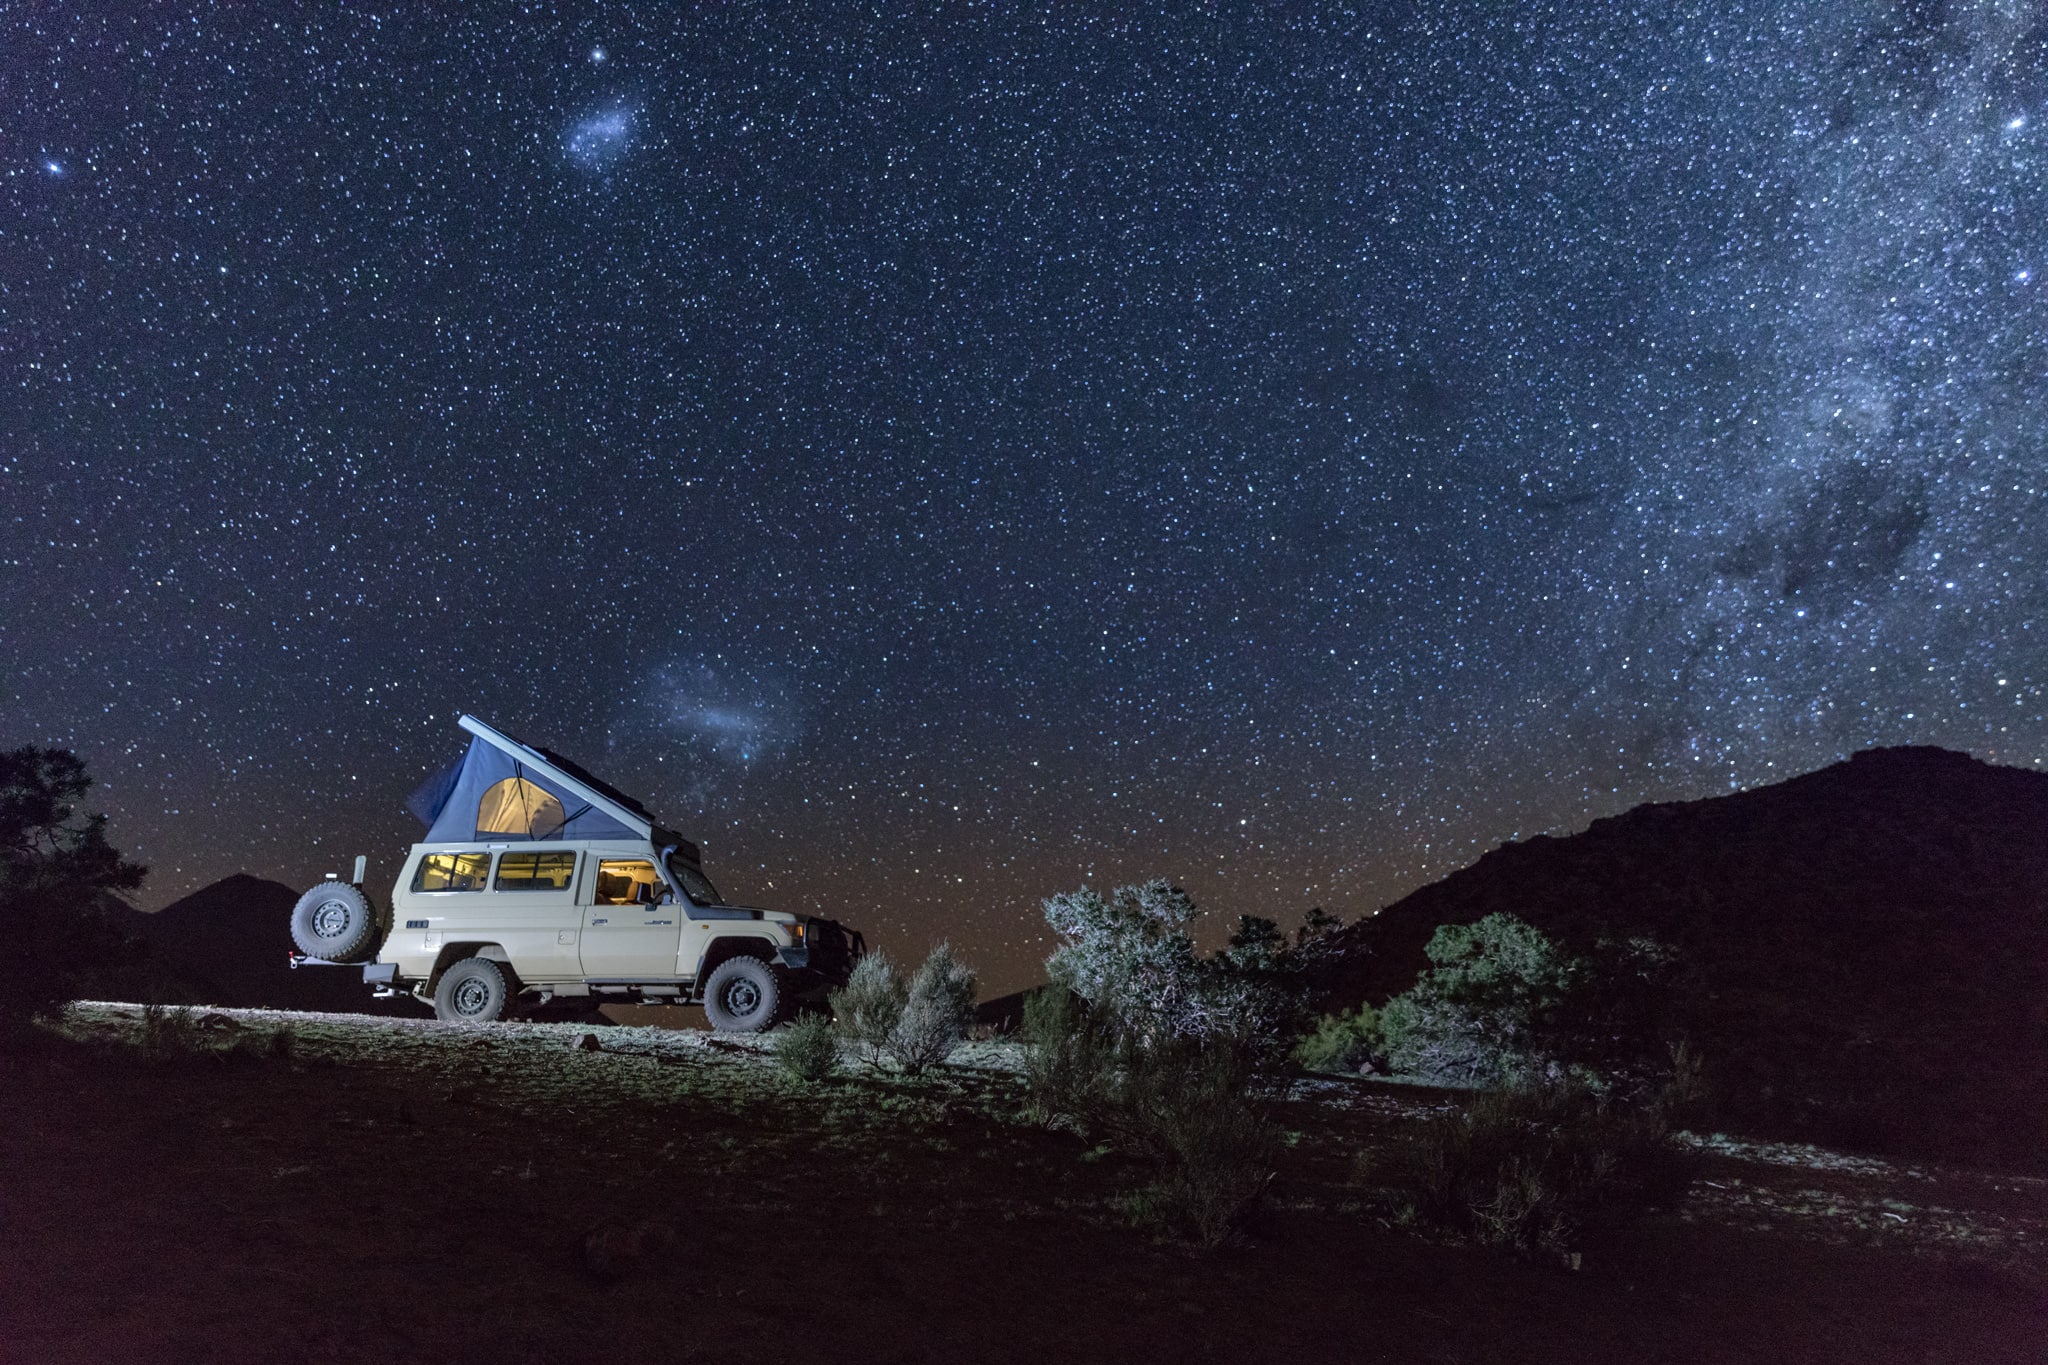 Camping under the stars in our Land Cruiser Troopy in the Elqui Valley, Chile